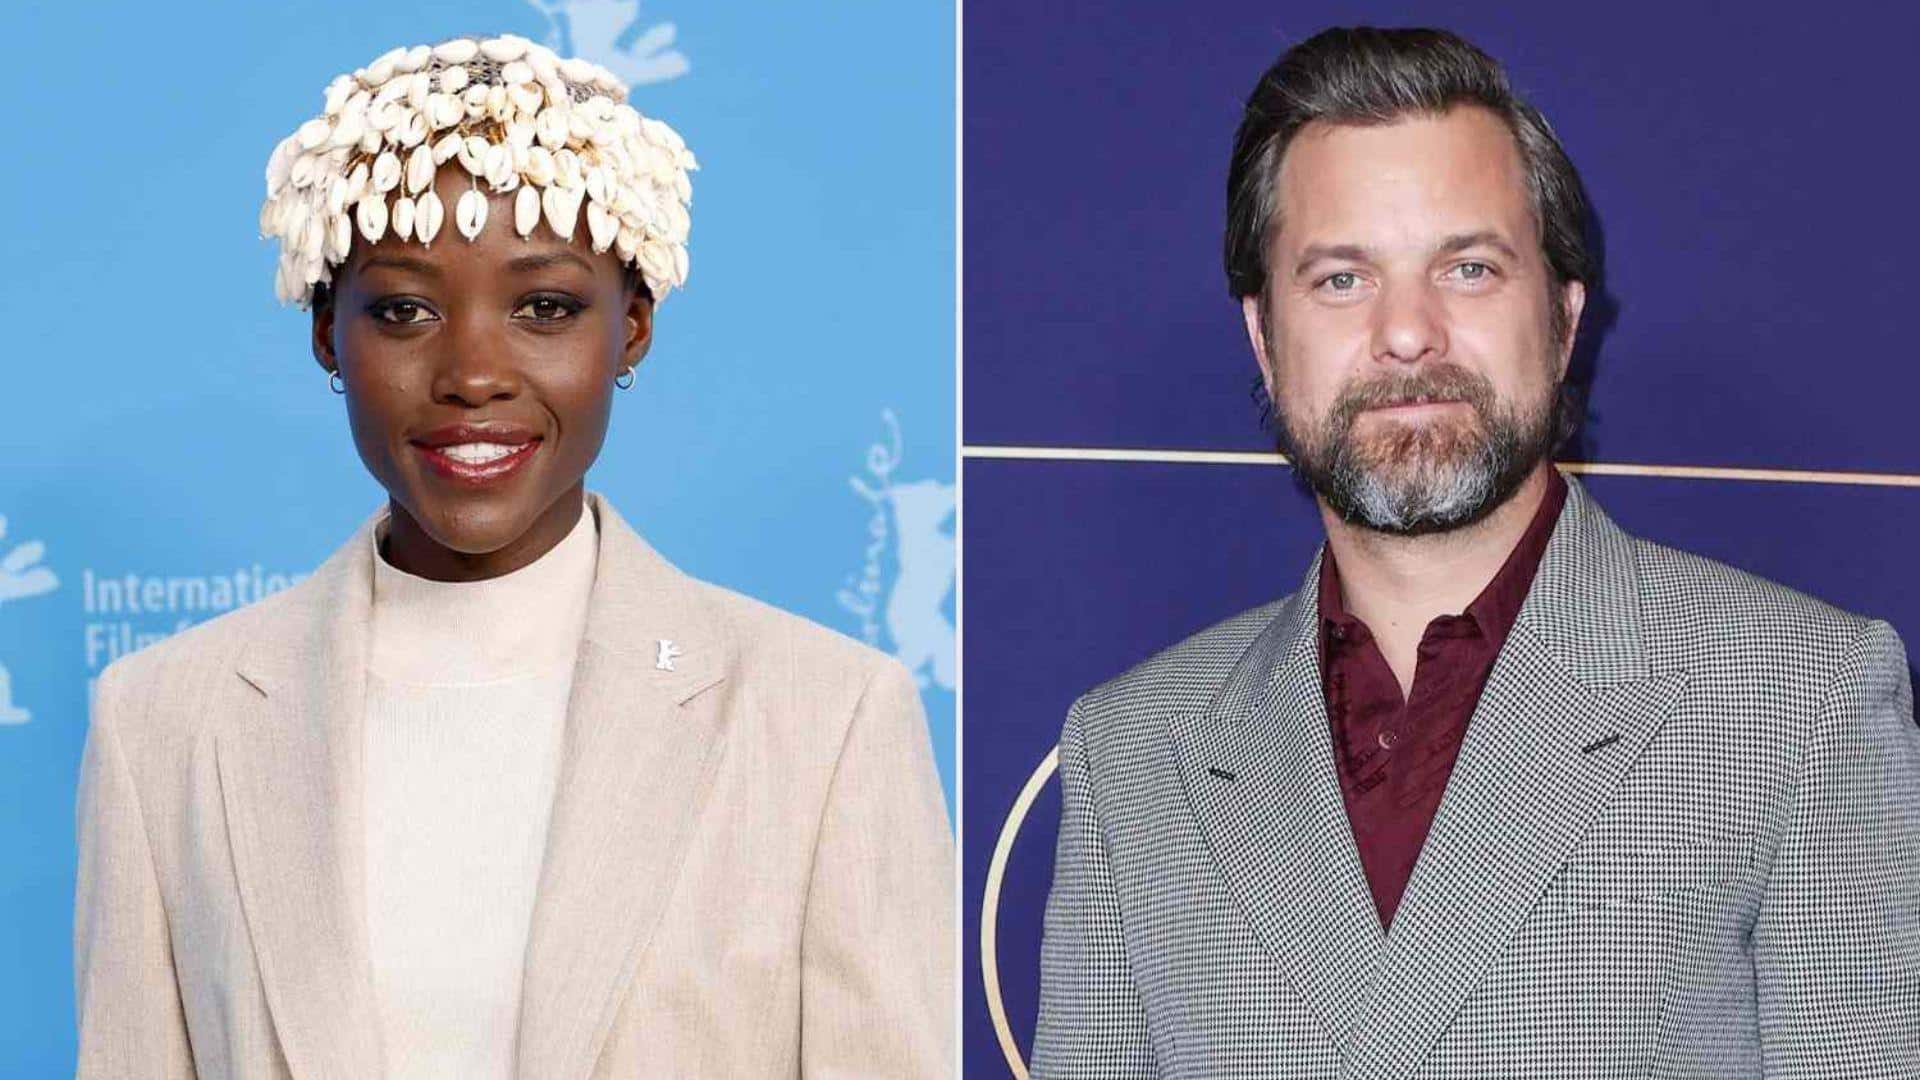 Are Joshua Jackson, Lupita Nyong'o officially dating? Find out